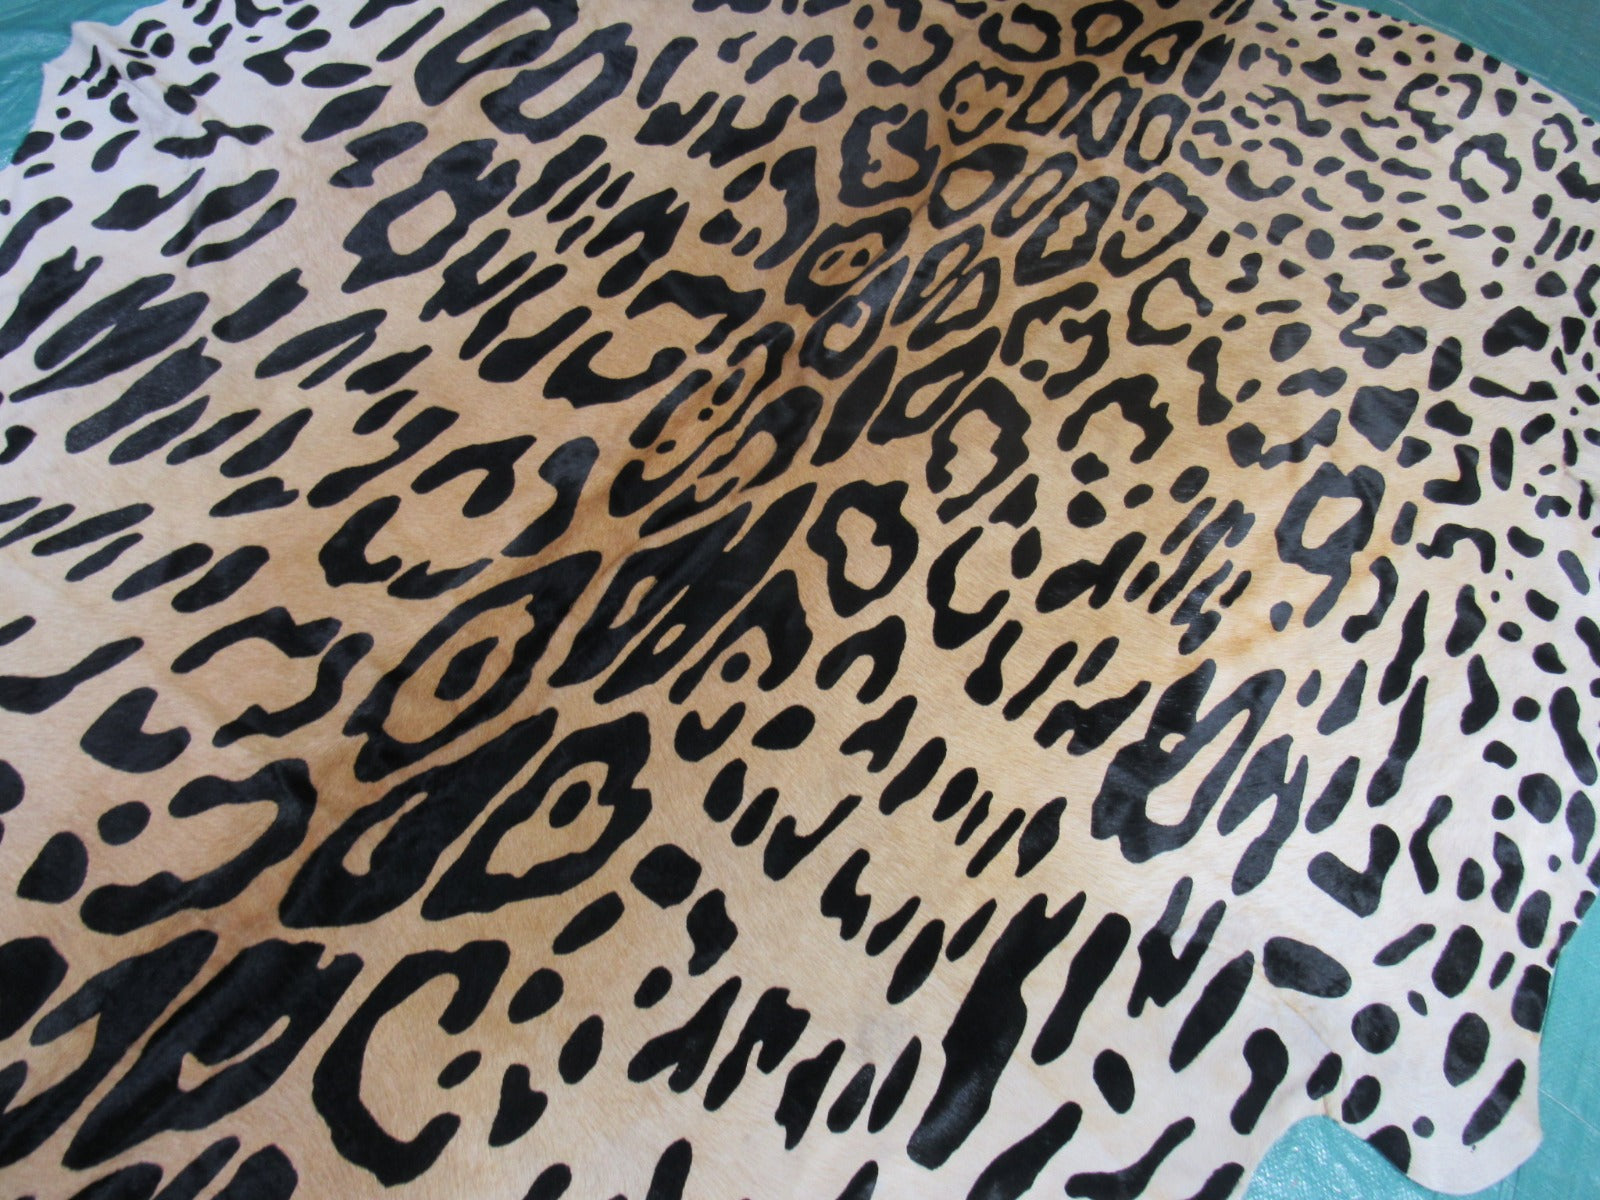 Jaguar Print Cowhide Rug (has a part that looks like a stain/ fire brand) Size: 7x6.2 feet C-1661